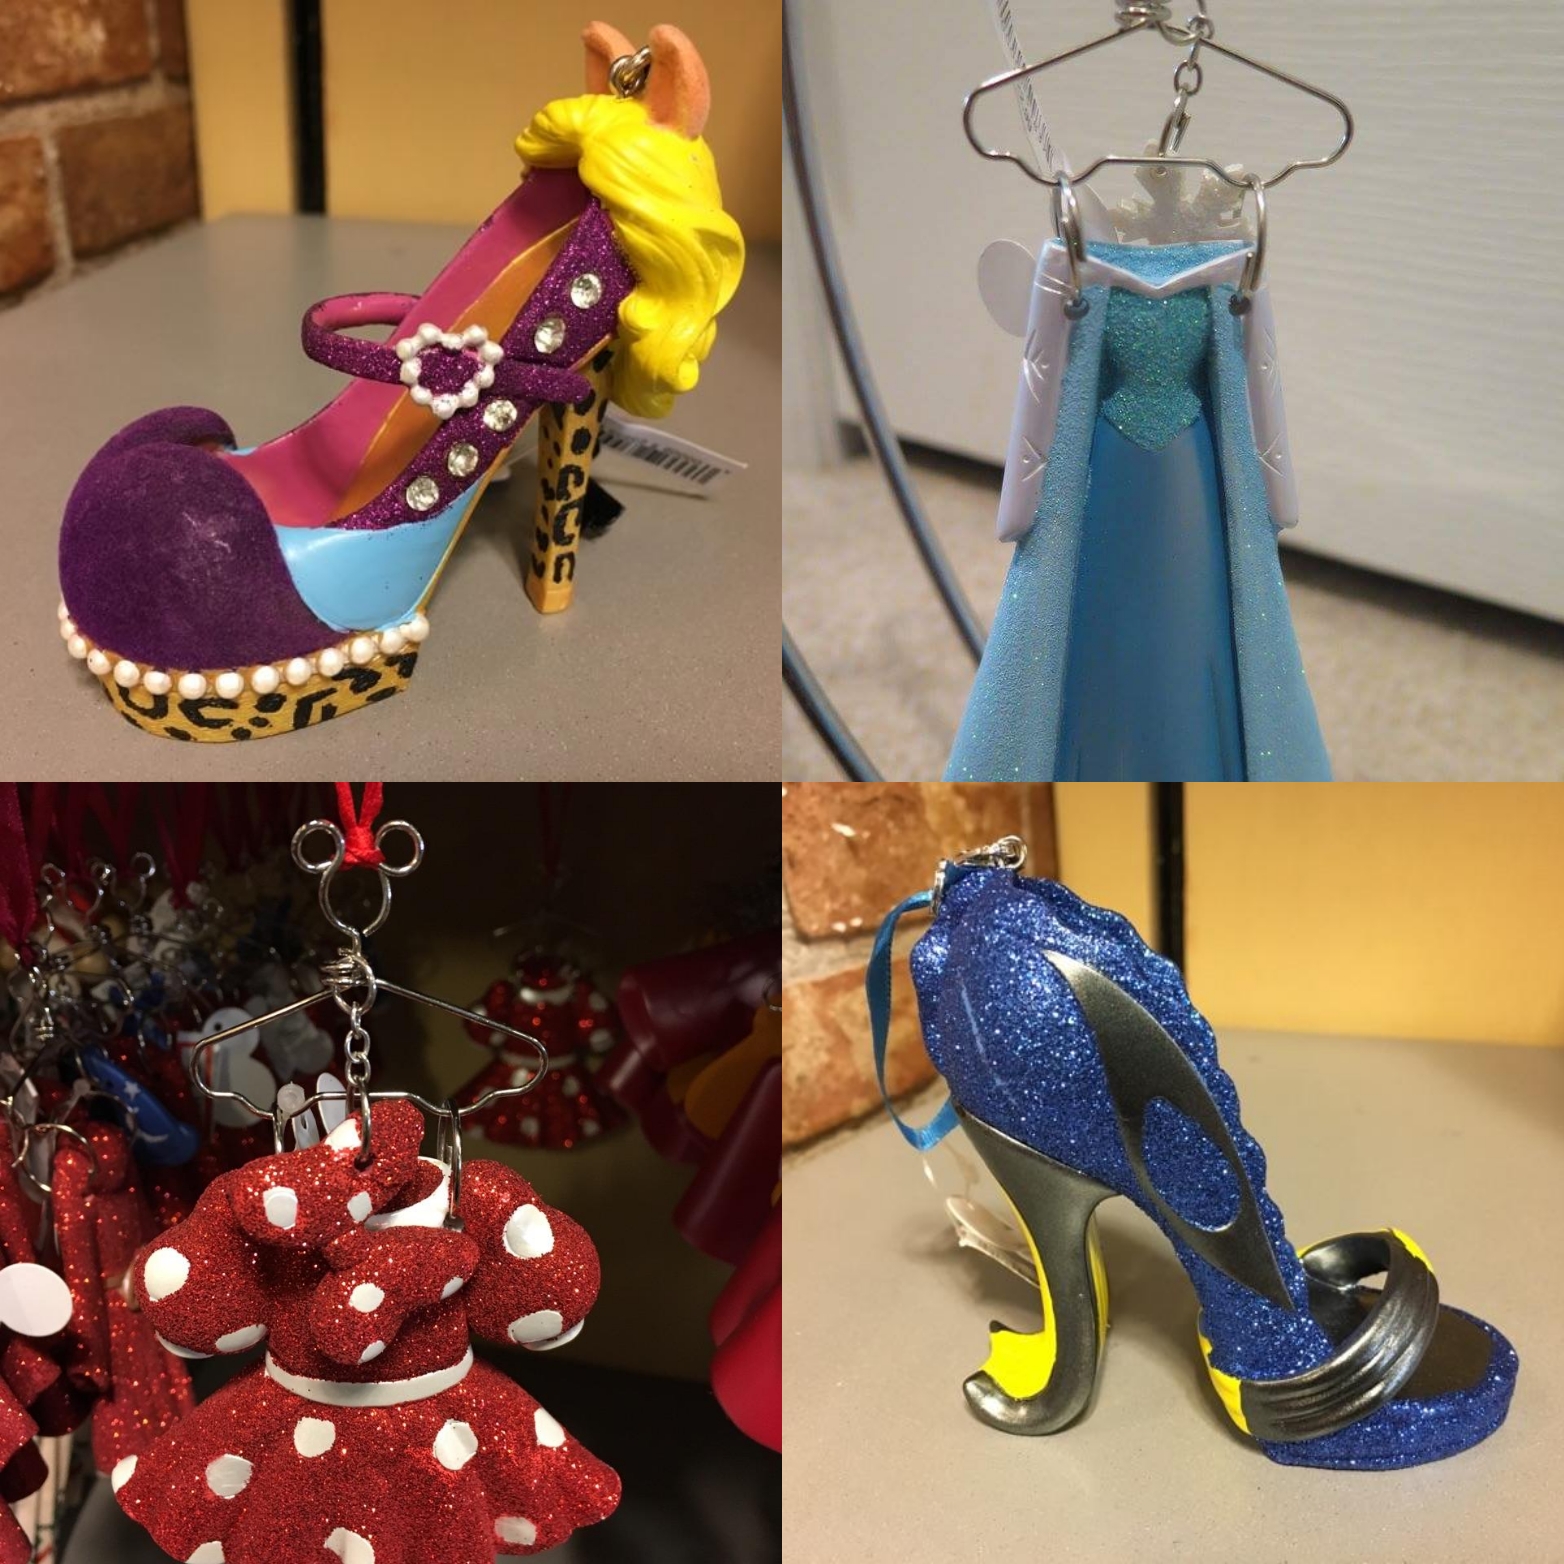 Tons Of Fashionable Disney Christmas Ornaments Available For Killer Prices